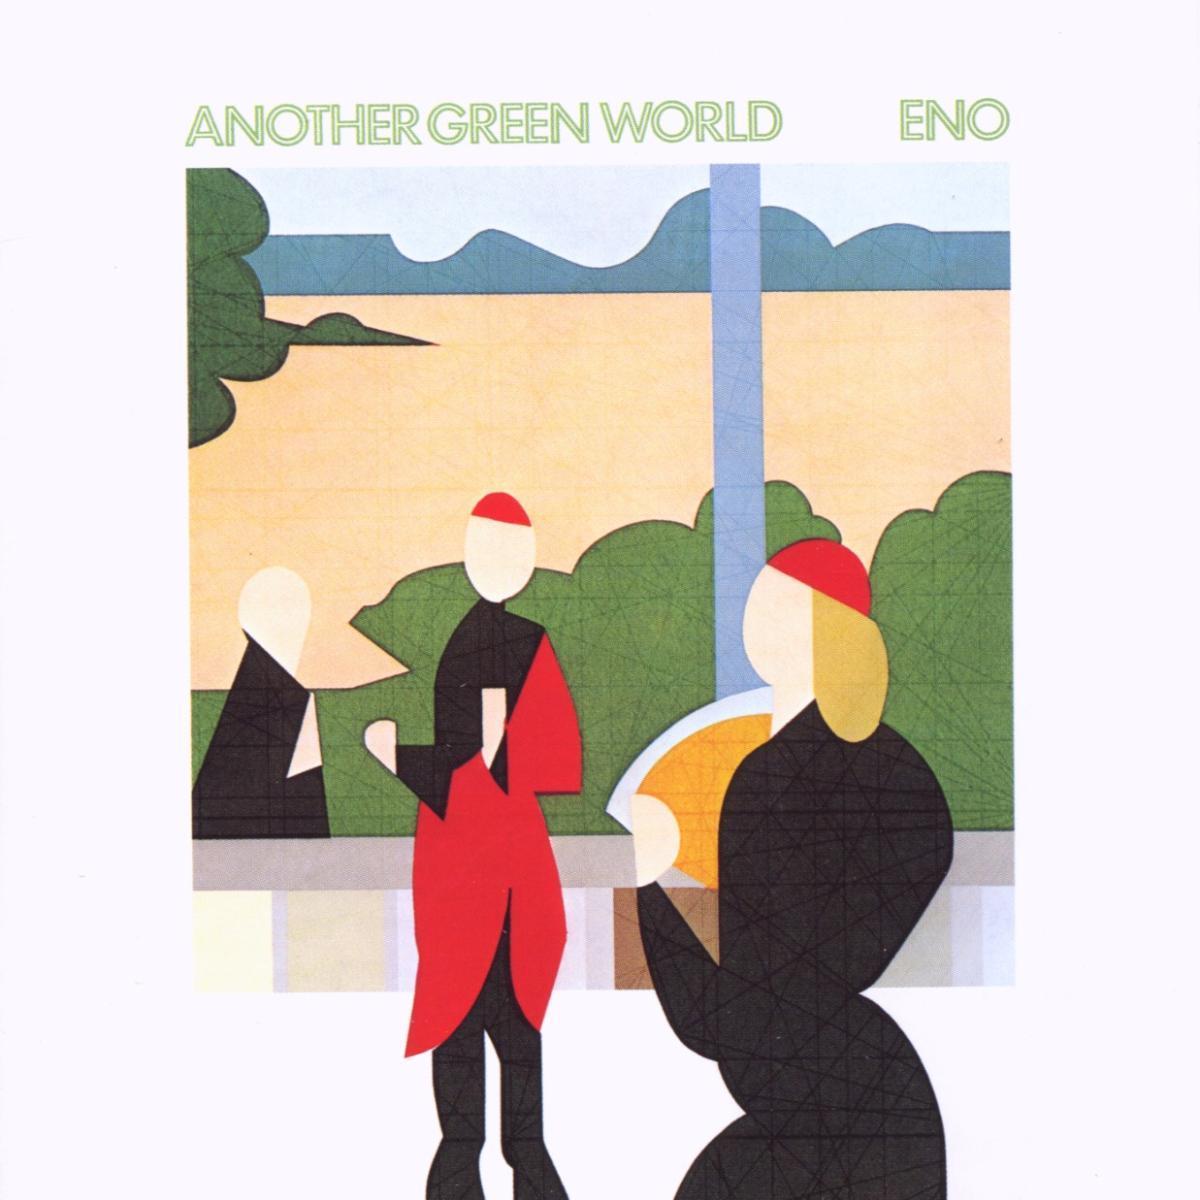 Brian Eno - Another Green World